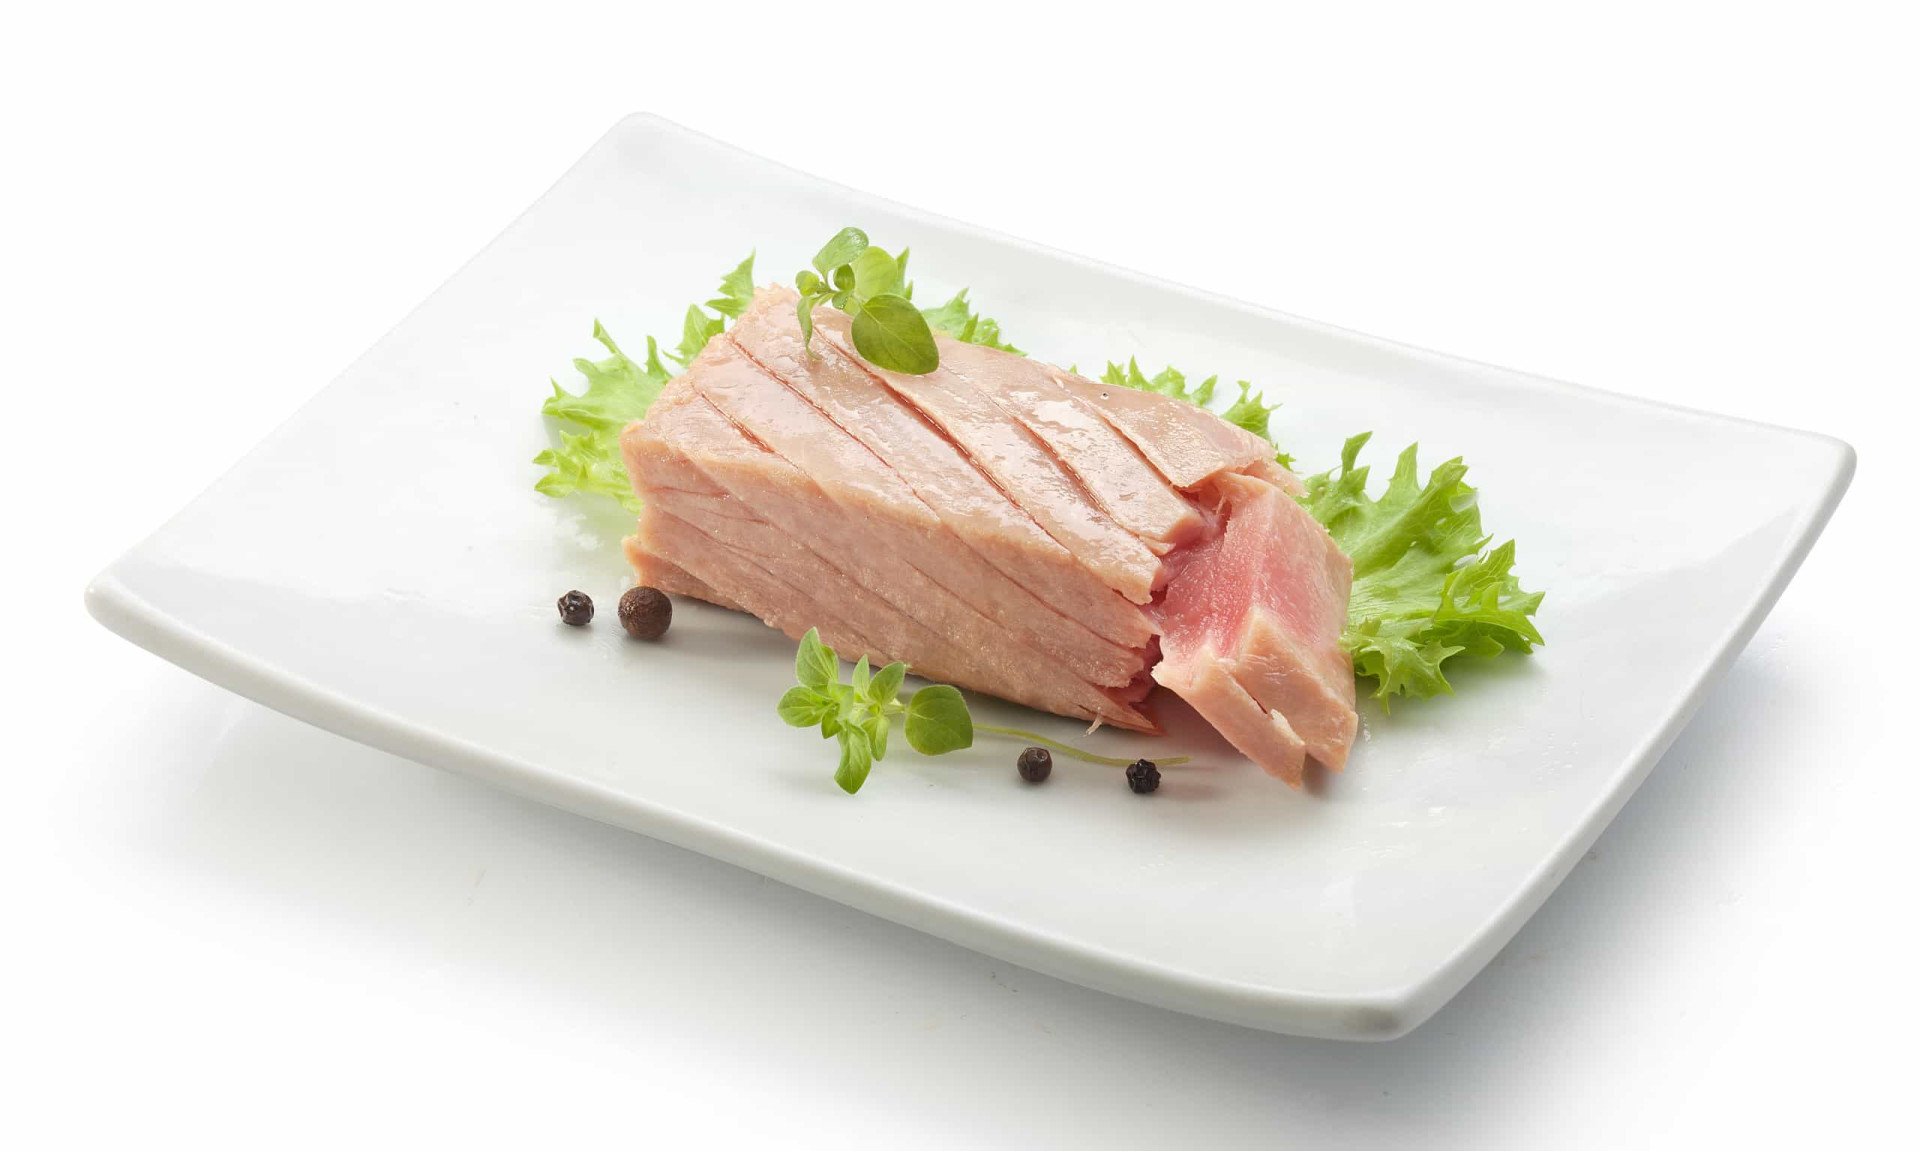 <p>Tuna is a delicious and nutritious food that can be a wonderful option to introduce fish to children. However, there are specific types of tuna that are more suitable for younger taste preferences.</p><p>You may also like:<a href="https://www.starsinsider.com/n/402990?utm_source=msn.com&utm_medium=display&utm_campaign=referral_description&utm_content=578219en-en"> Celebrities spotted using public transport</a></p>